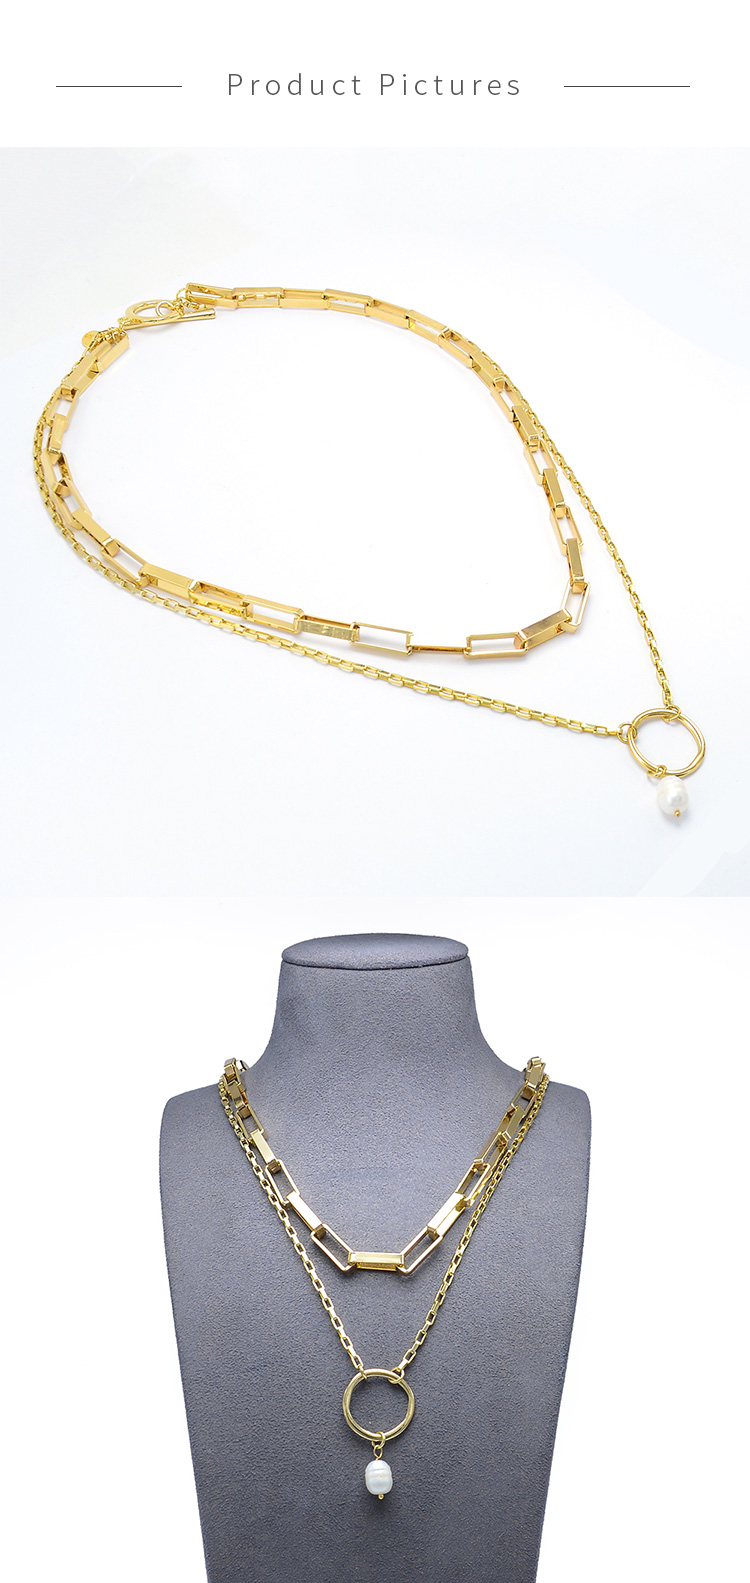 2 Layer Gold Chian Necklace